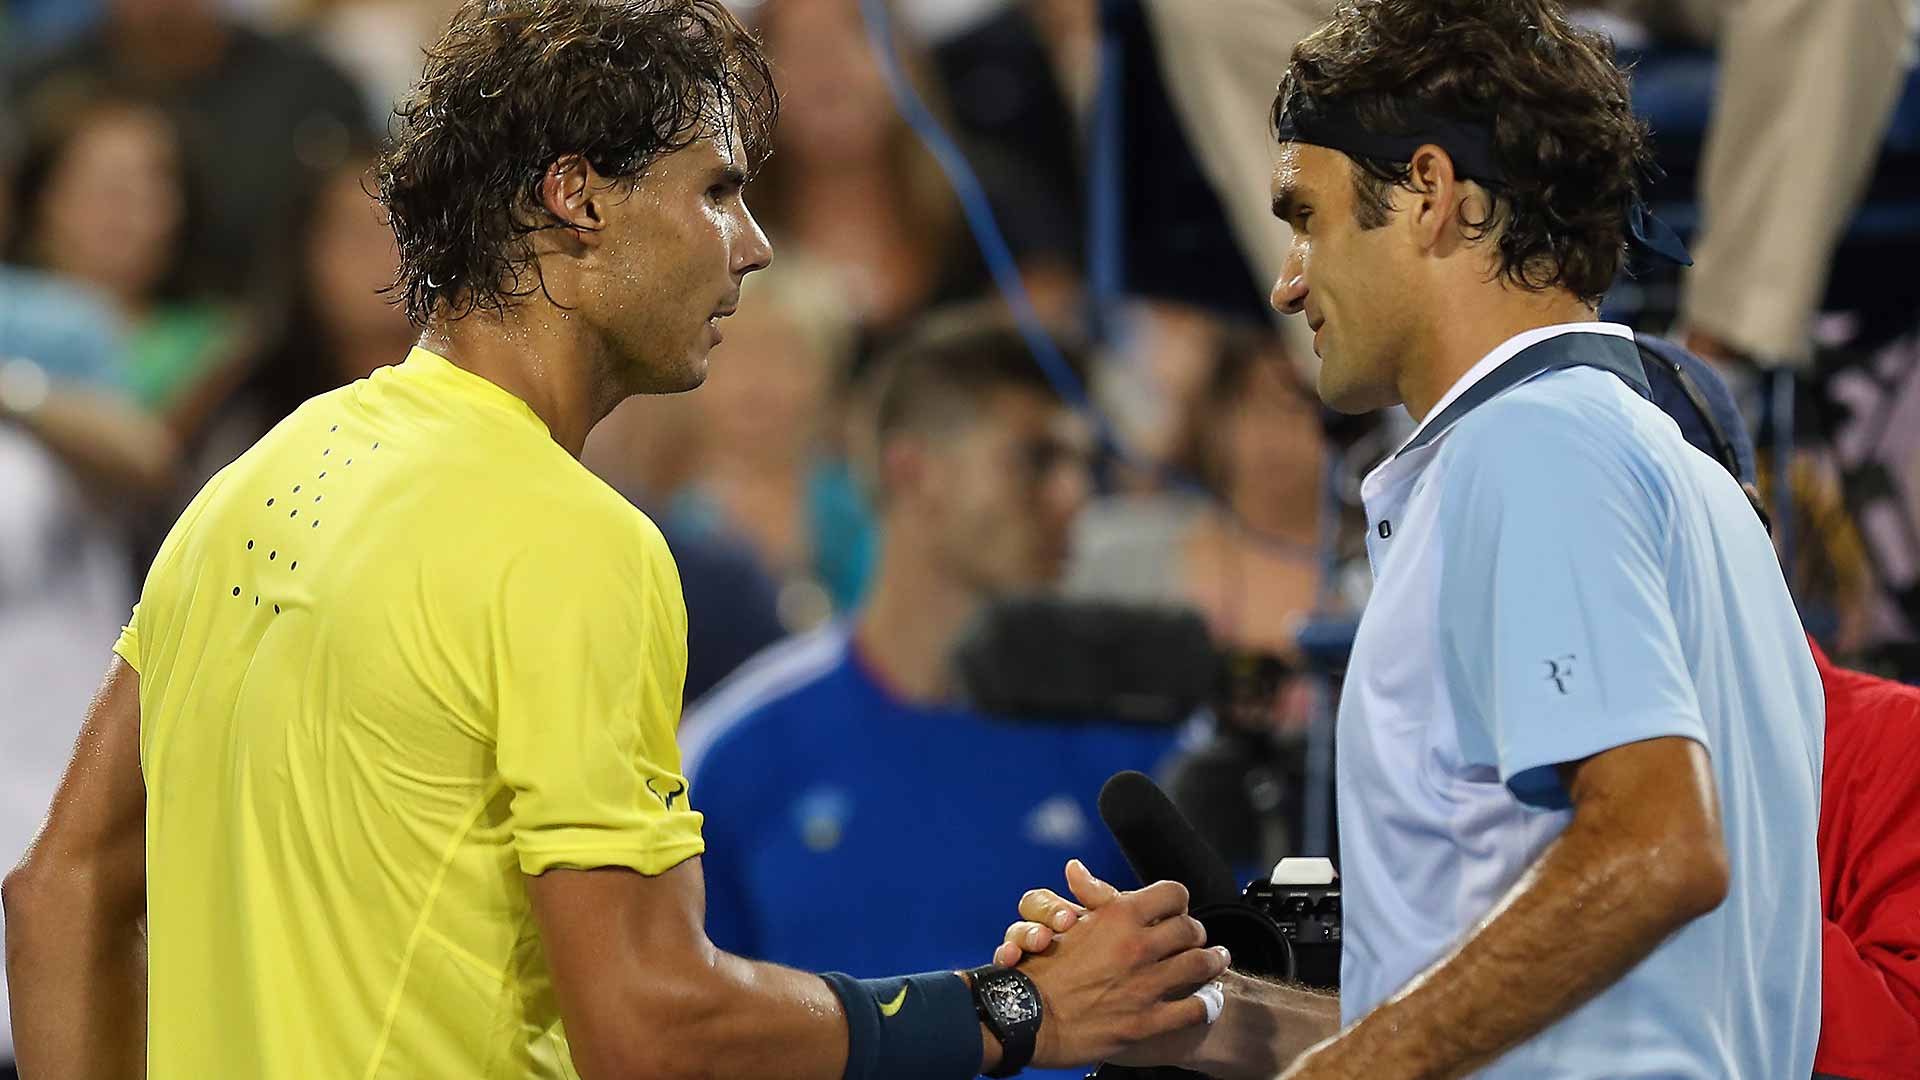 Rafael Nadal outlasts Roger Federer after three sets of high quality tennis in the 2013 Cincinnati final.